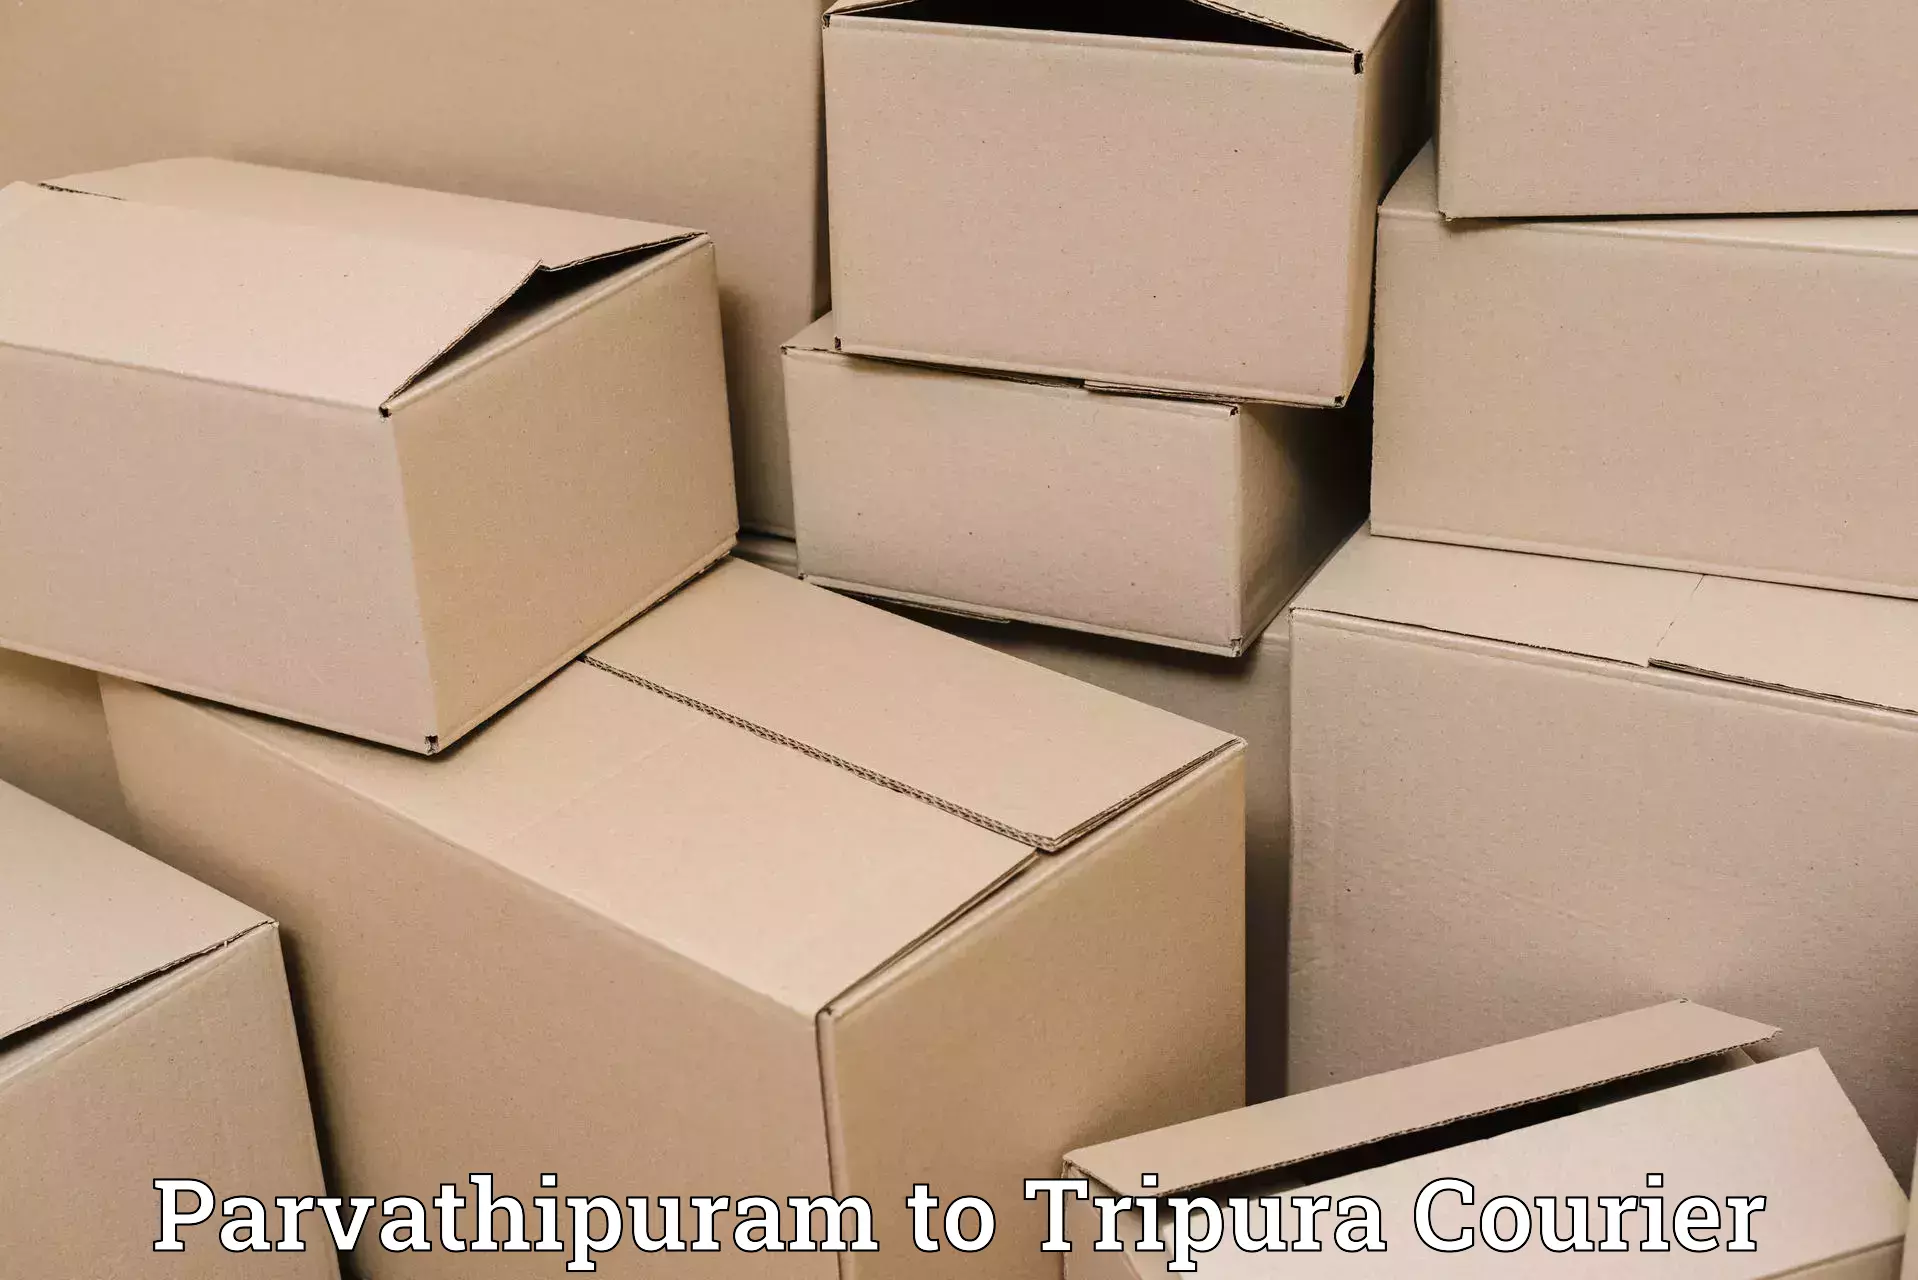 Express delivery capabilities Parvathipuram to Tripura